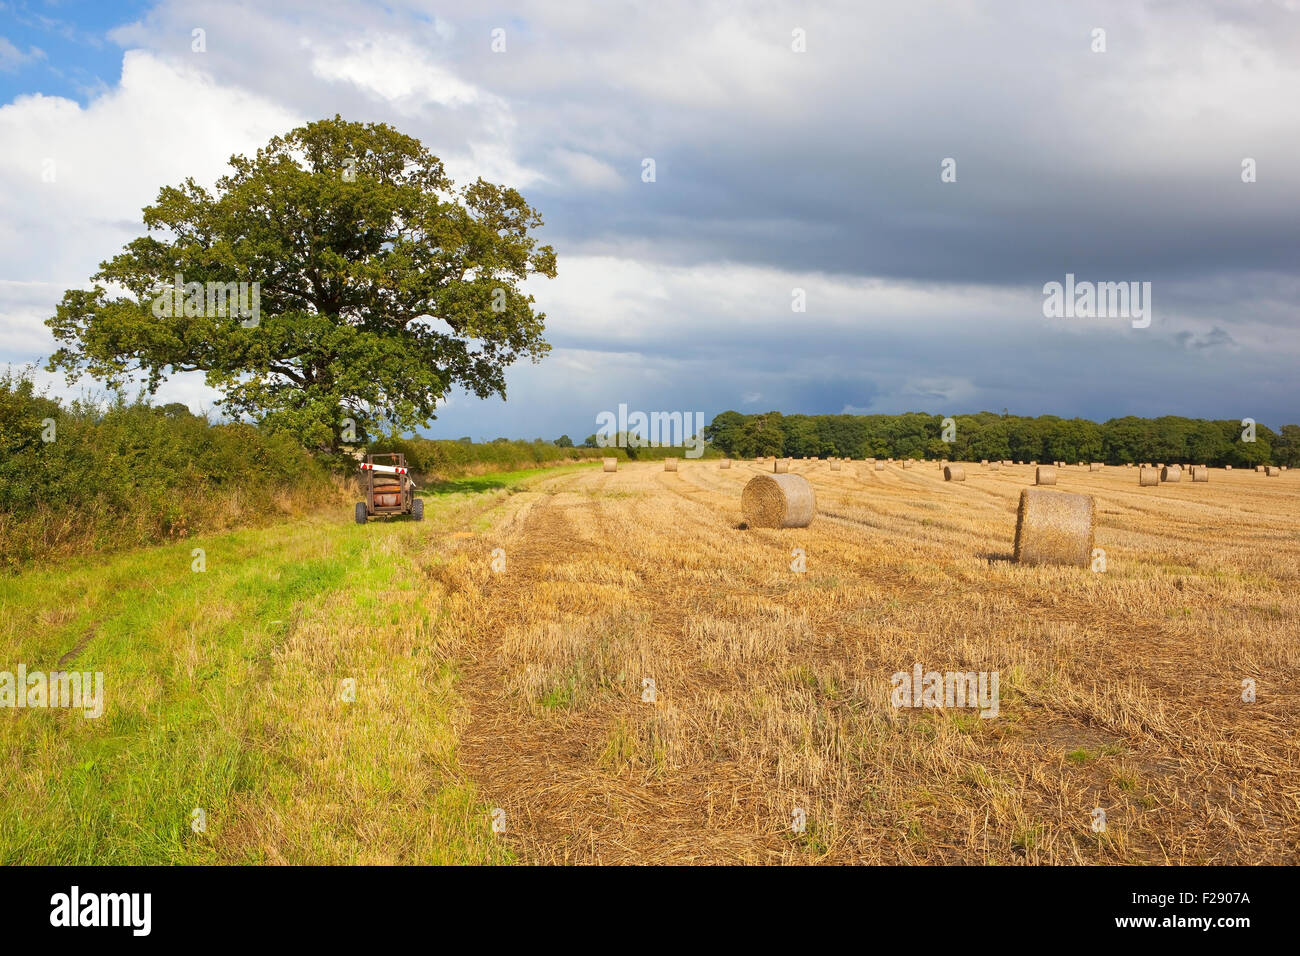 A golden stubble field with round straw bales by a hedgerow Oak tree under a cloudy September sky. Stock Photo